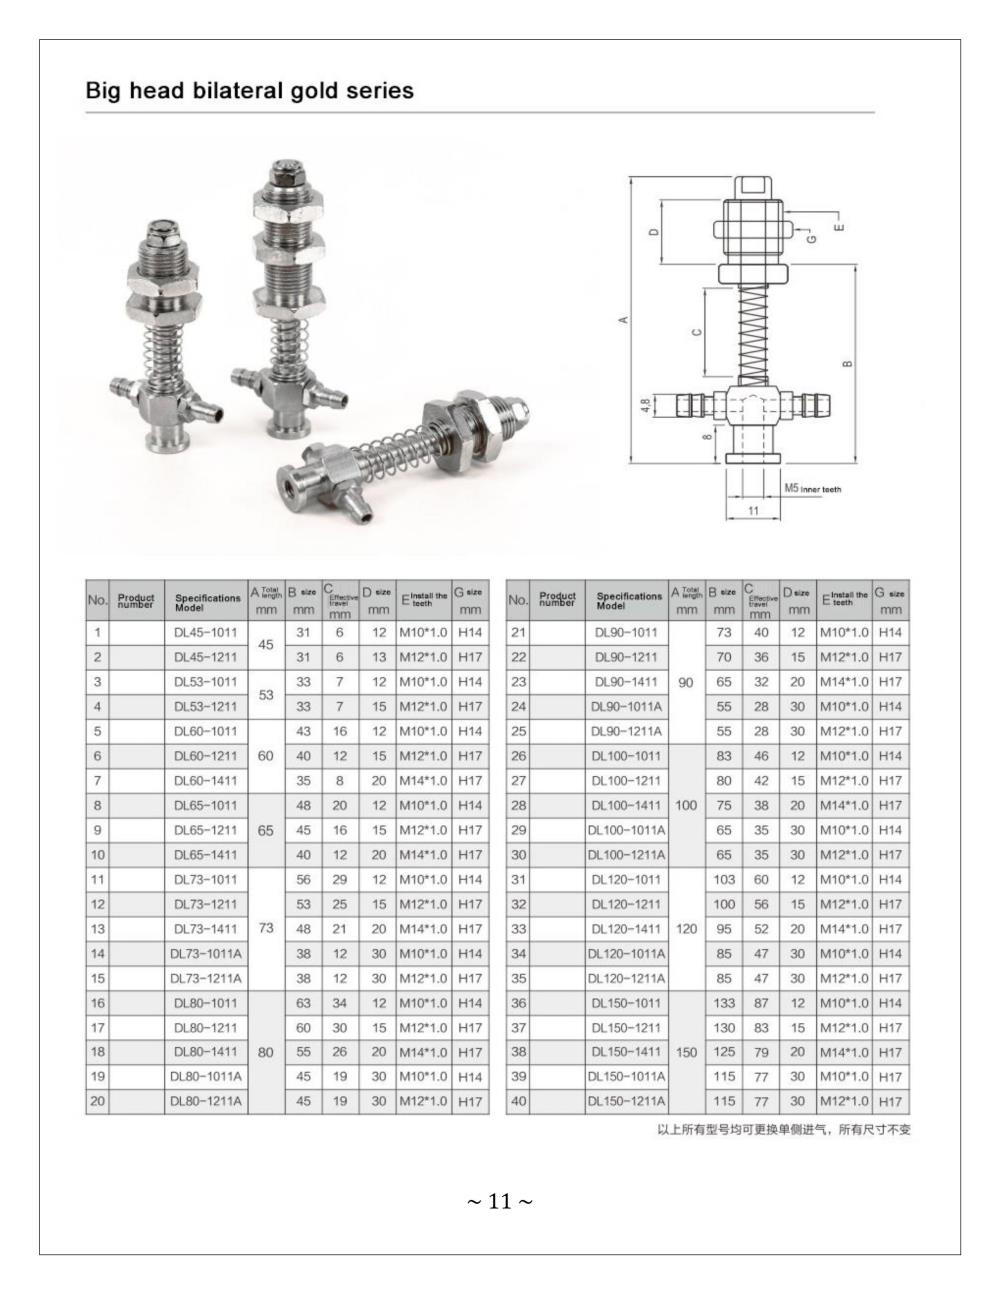 SUCTION STEMS, HOLDER, SUCKER BASE  ที่ยึดจุกยาง,S-5, SS-5 , S-10 , SS-10 ,S20 ,SS-20  , S-30 , SS-30 , VFIL  VFI,,Automation and Electronics/Automation Equipment/Robotic Components